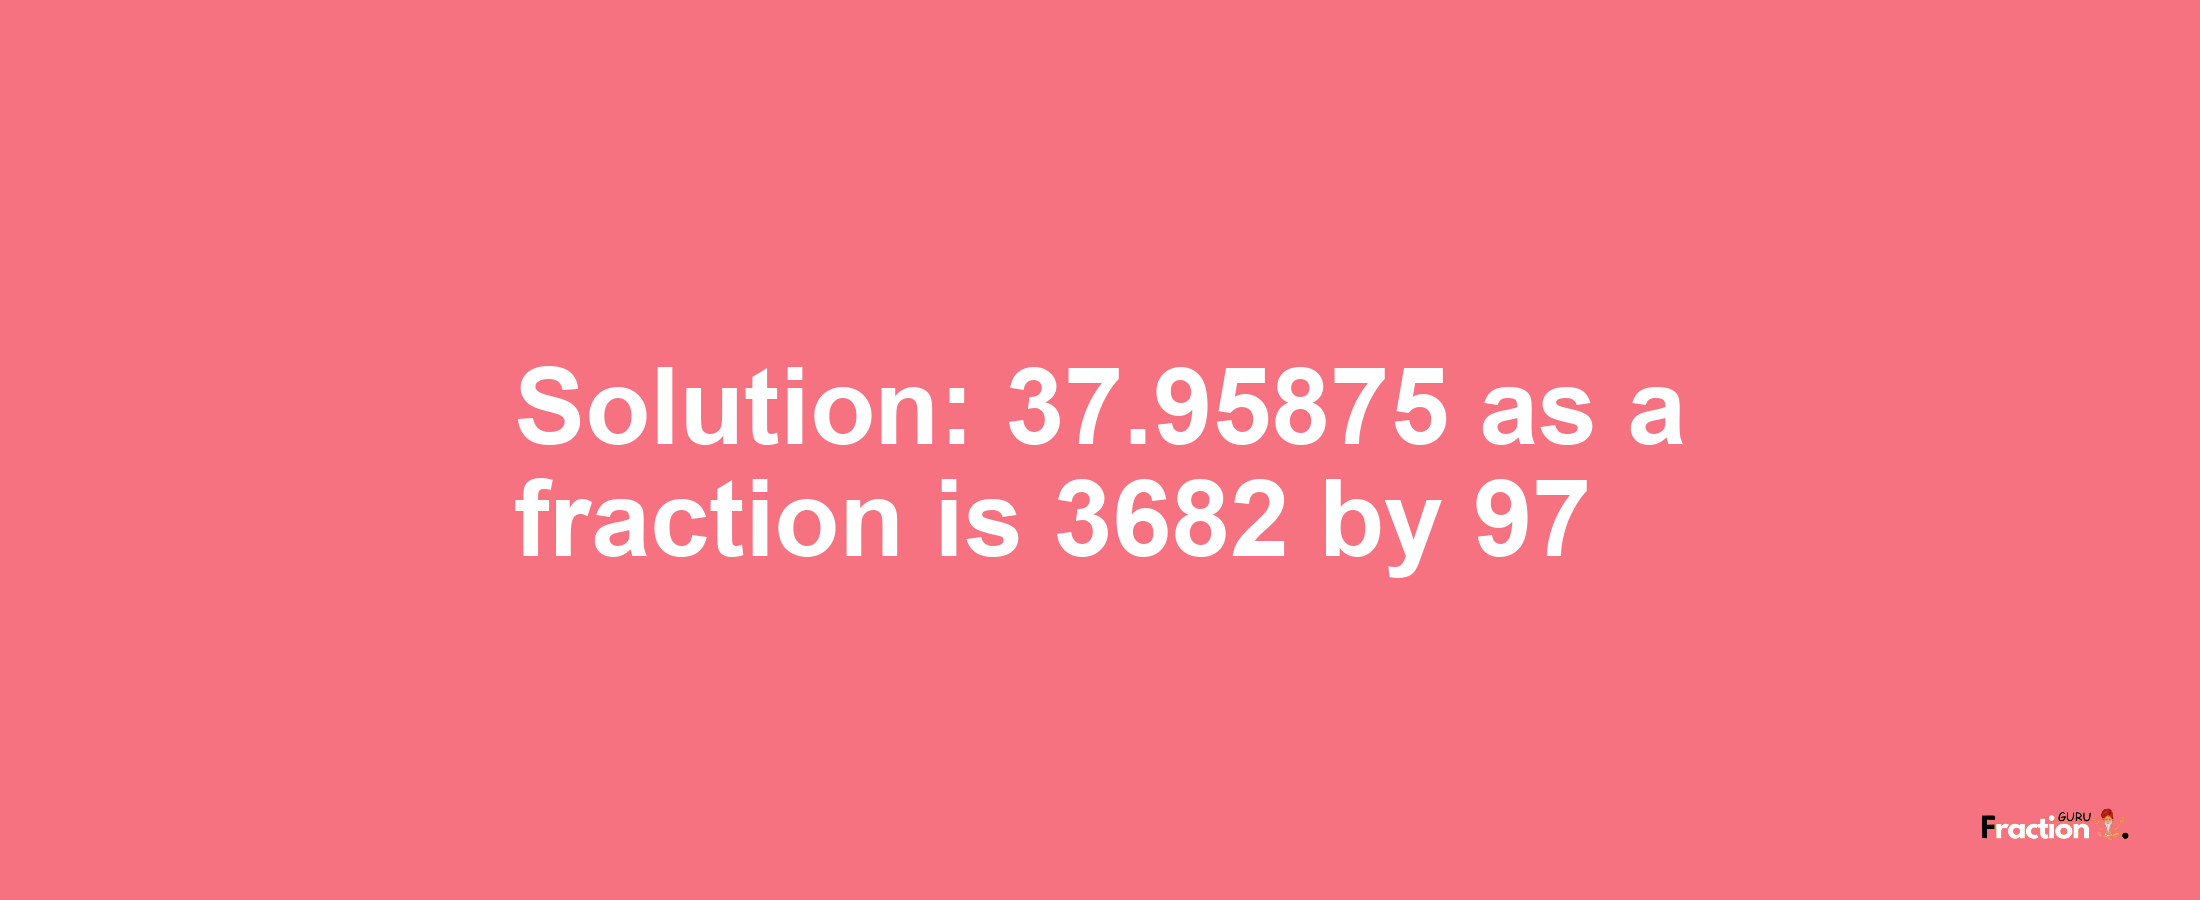 Solution:37.95875 as a fraction is 3682/97